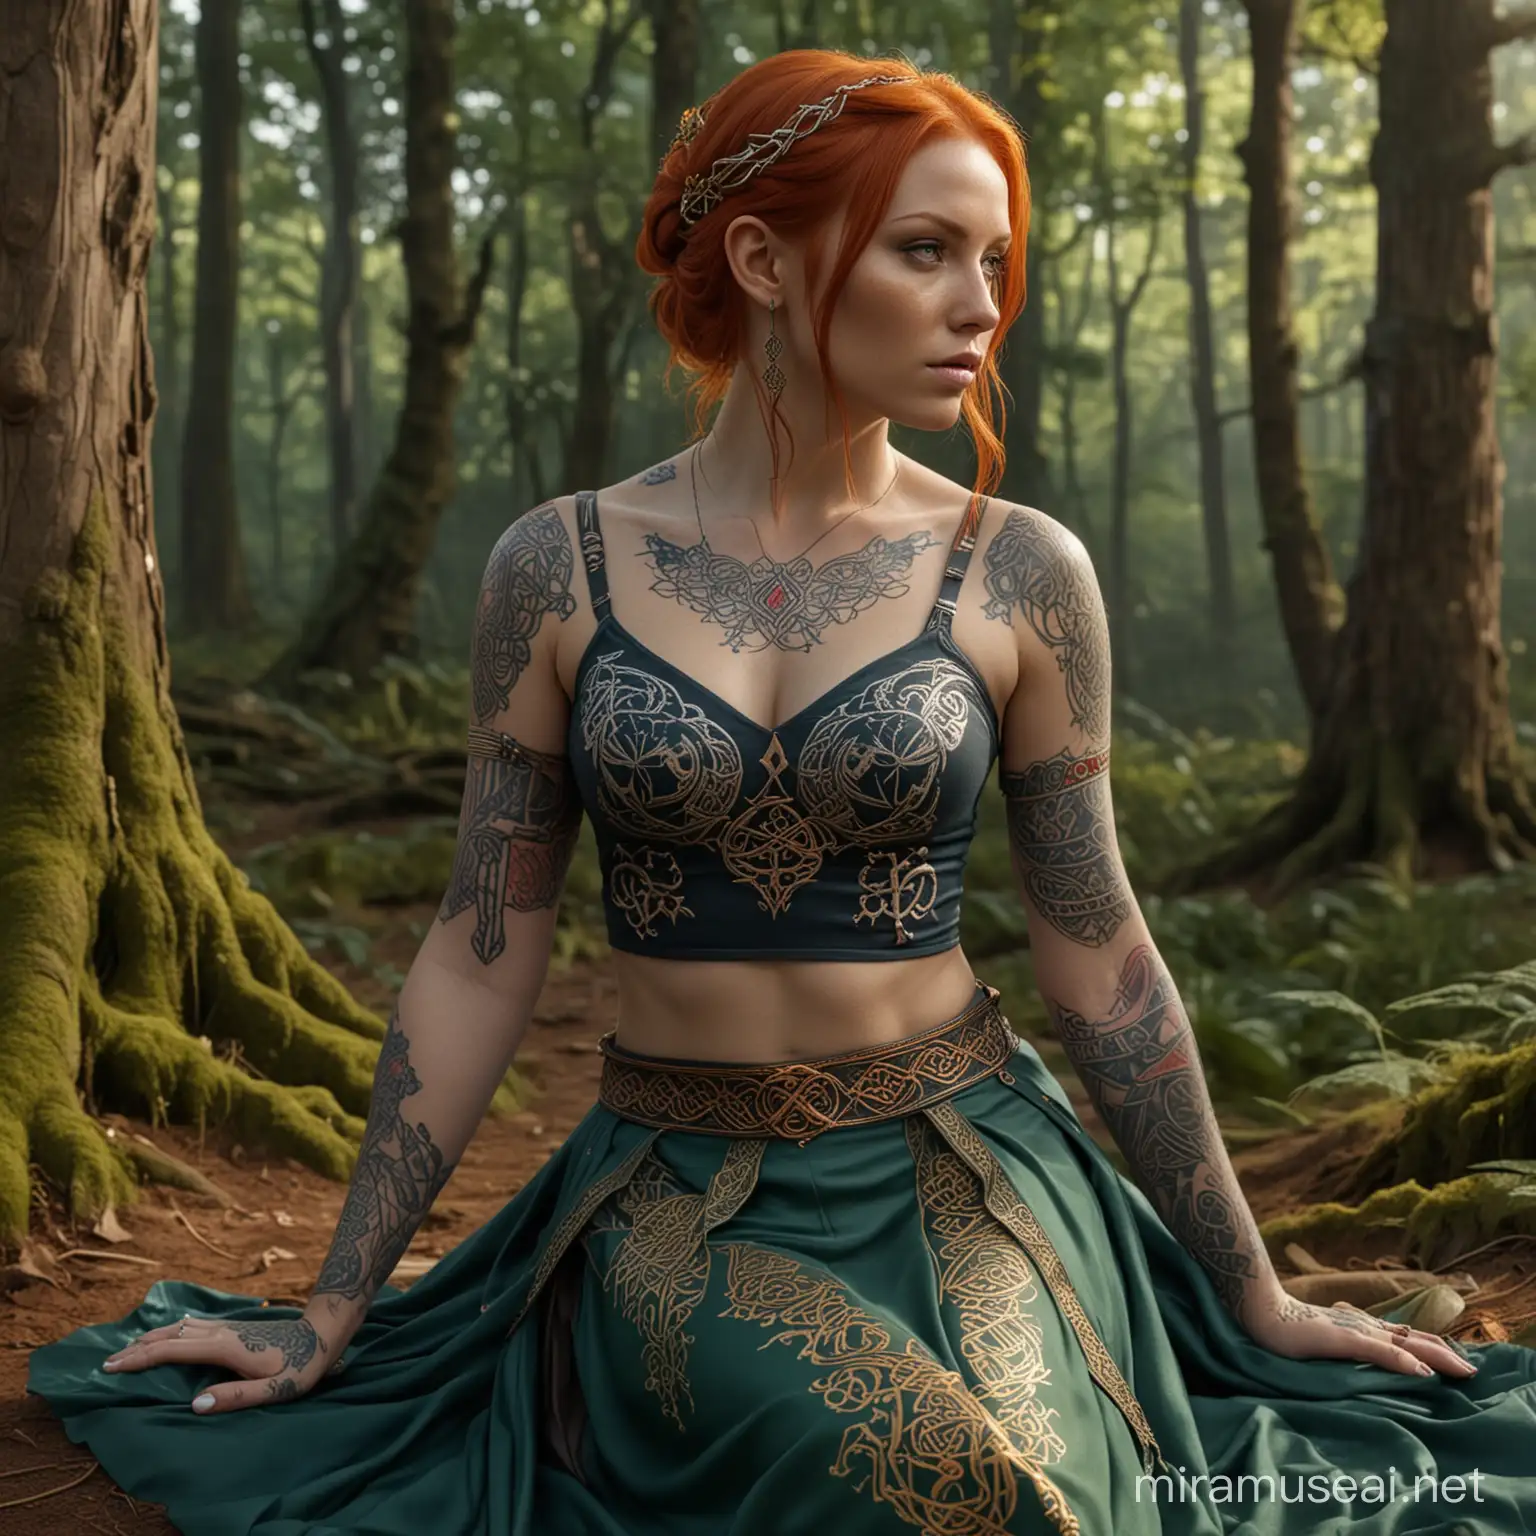 ultrarealistic high detail 4k full body long shot showing an anatomically correct female human with fiery red hair decorated with silver, colourful draconic symbols tattooed on arms, wearing a green sleeveless open chest top engraved in gold with celtic runes, sitting in a forest, wearing a very short loose skirt blue skirt embroided with colourful elven symbols